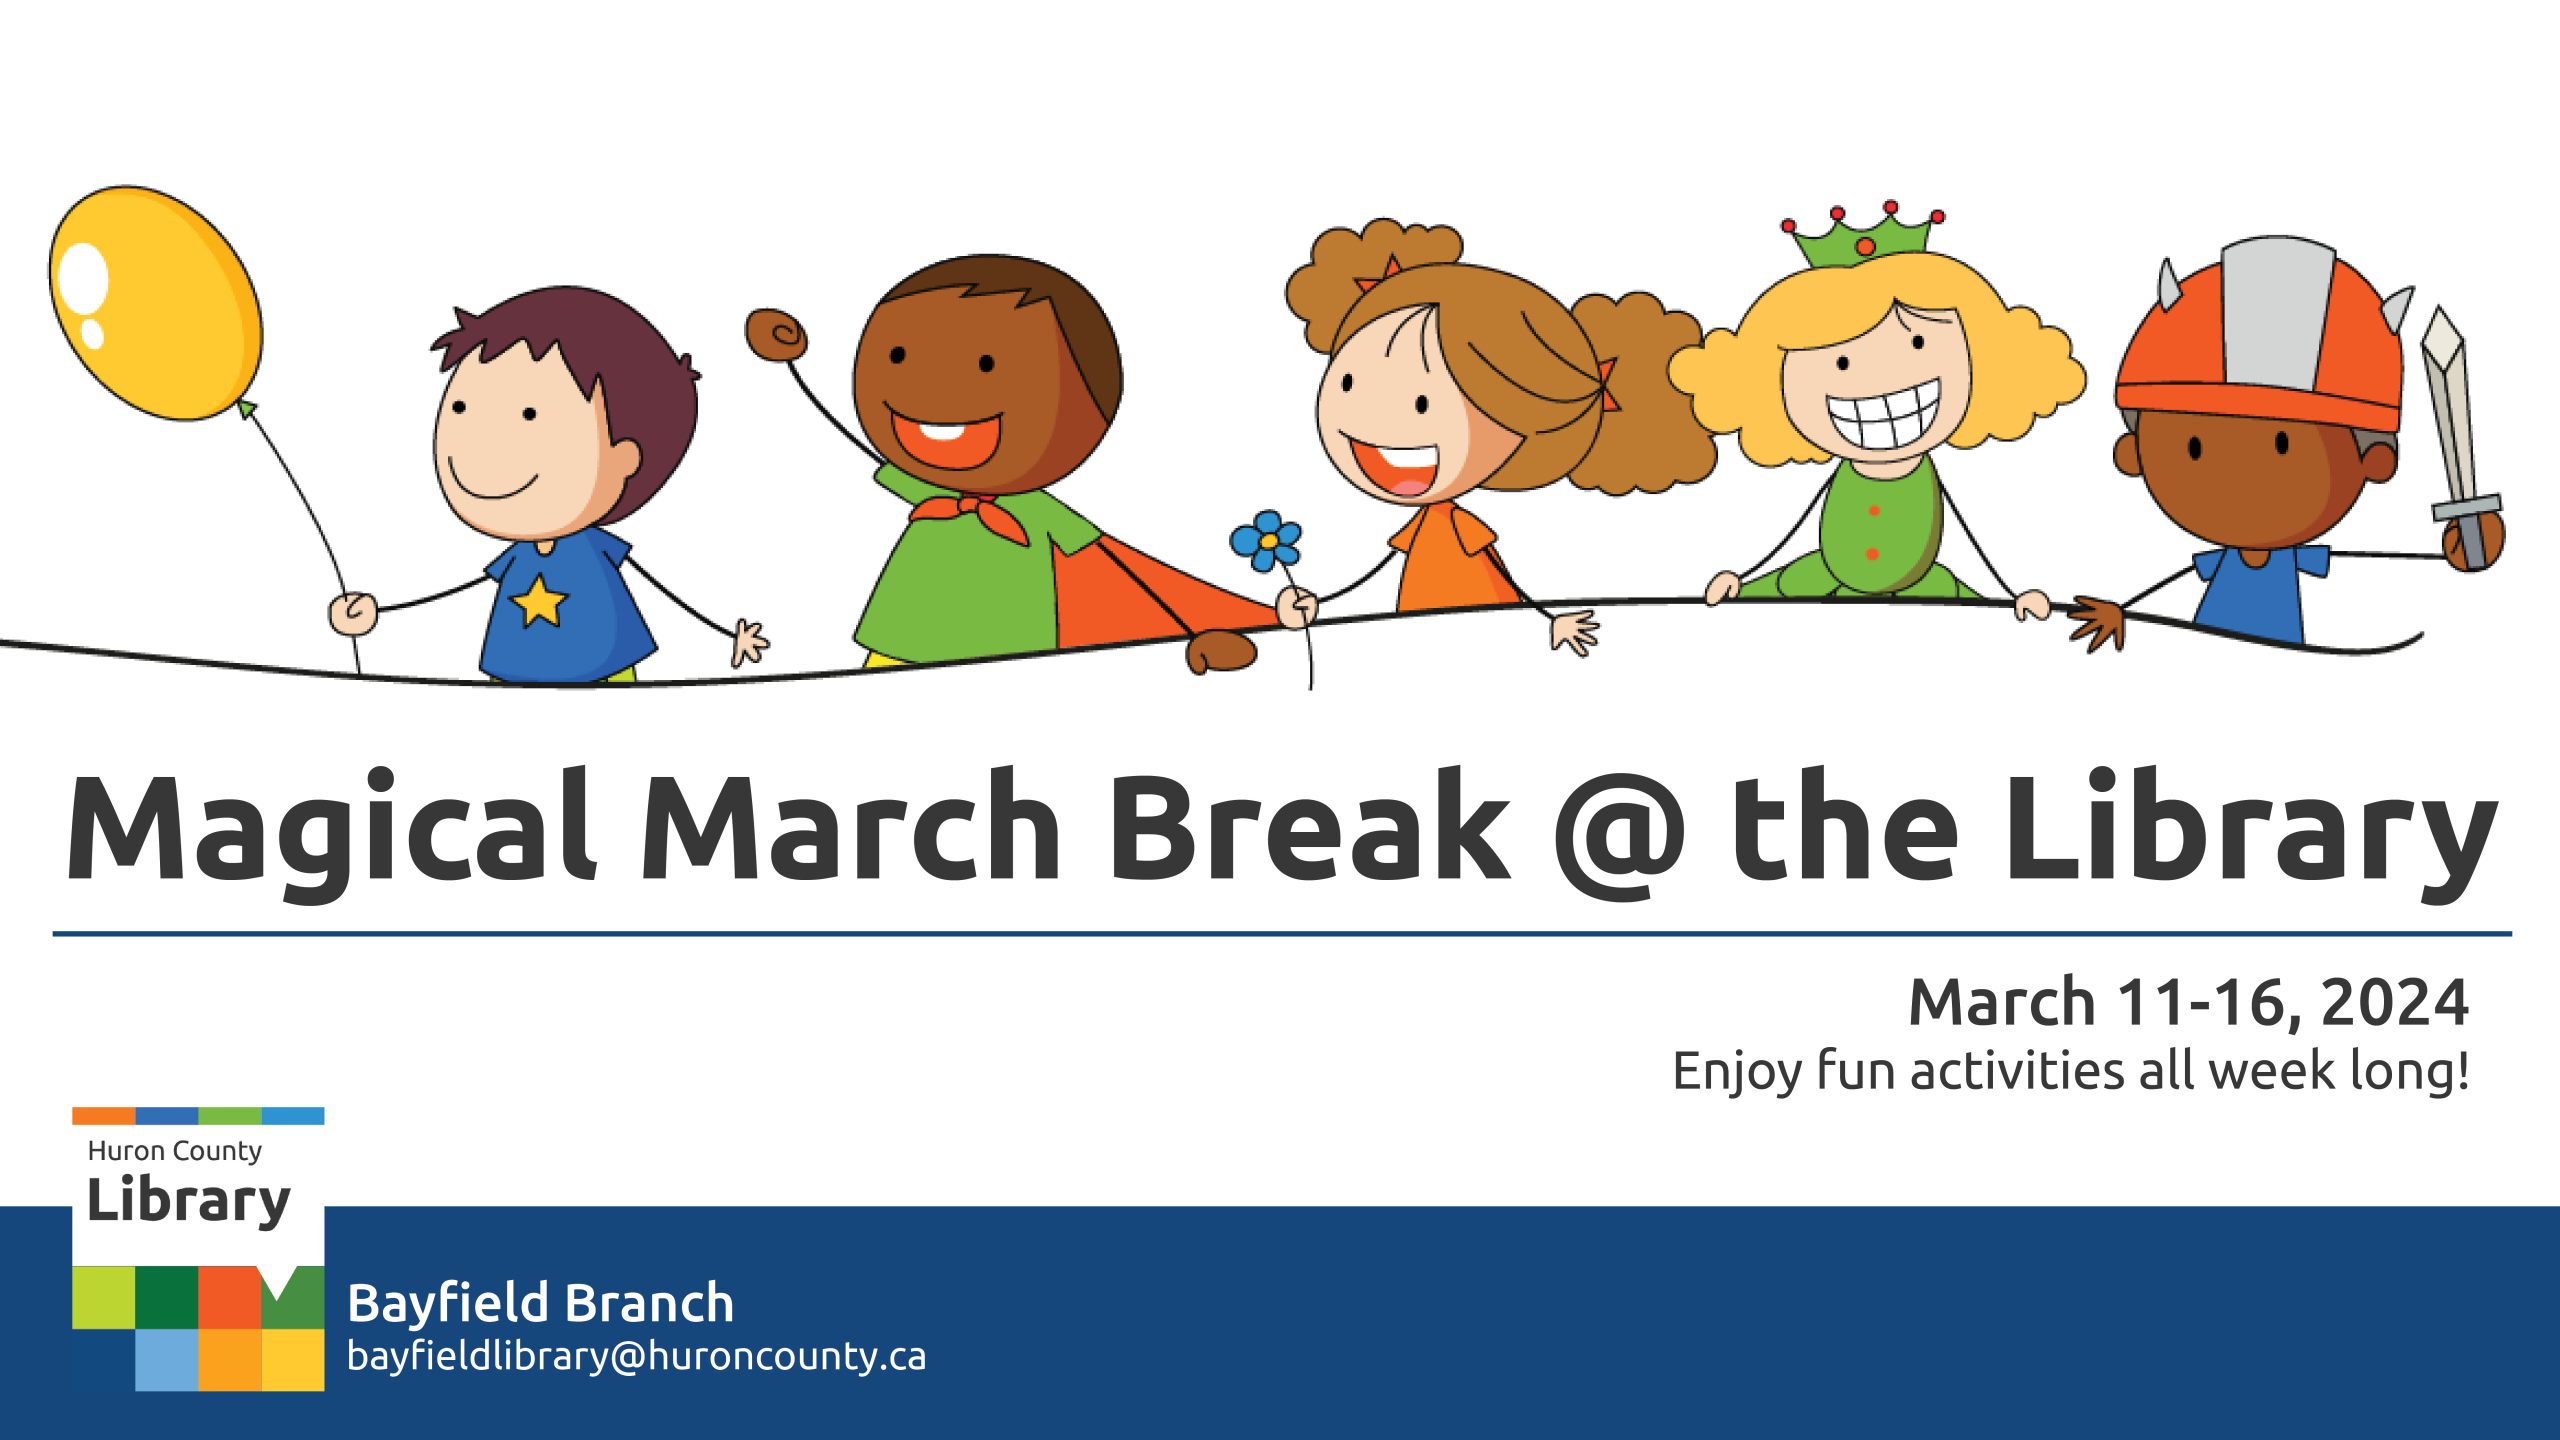 Illustration of kids having fun with text promoting magical march break at the Bayfield branch